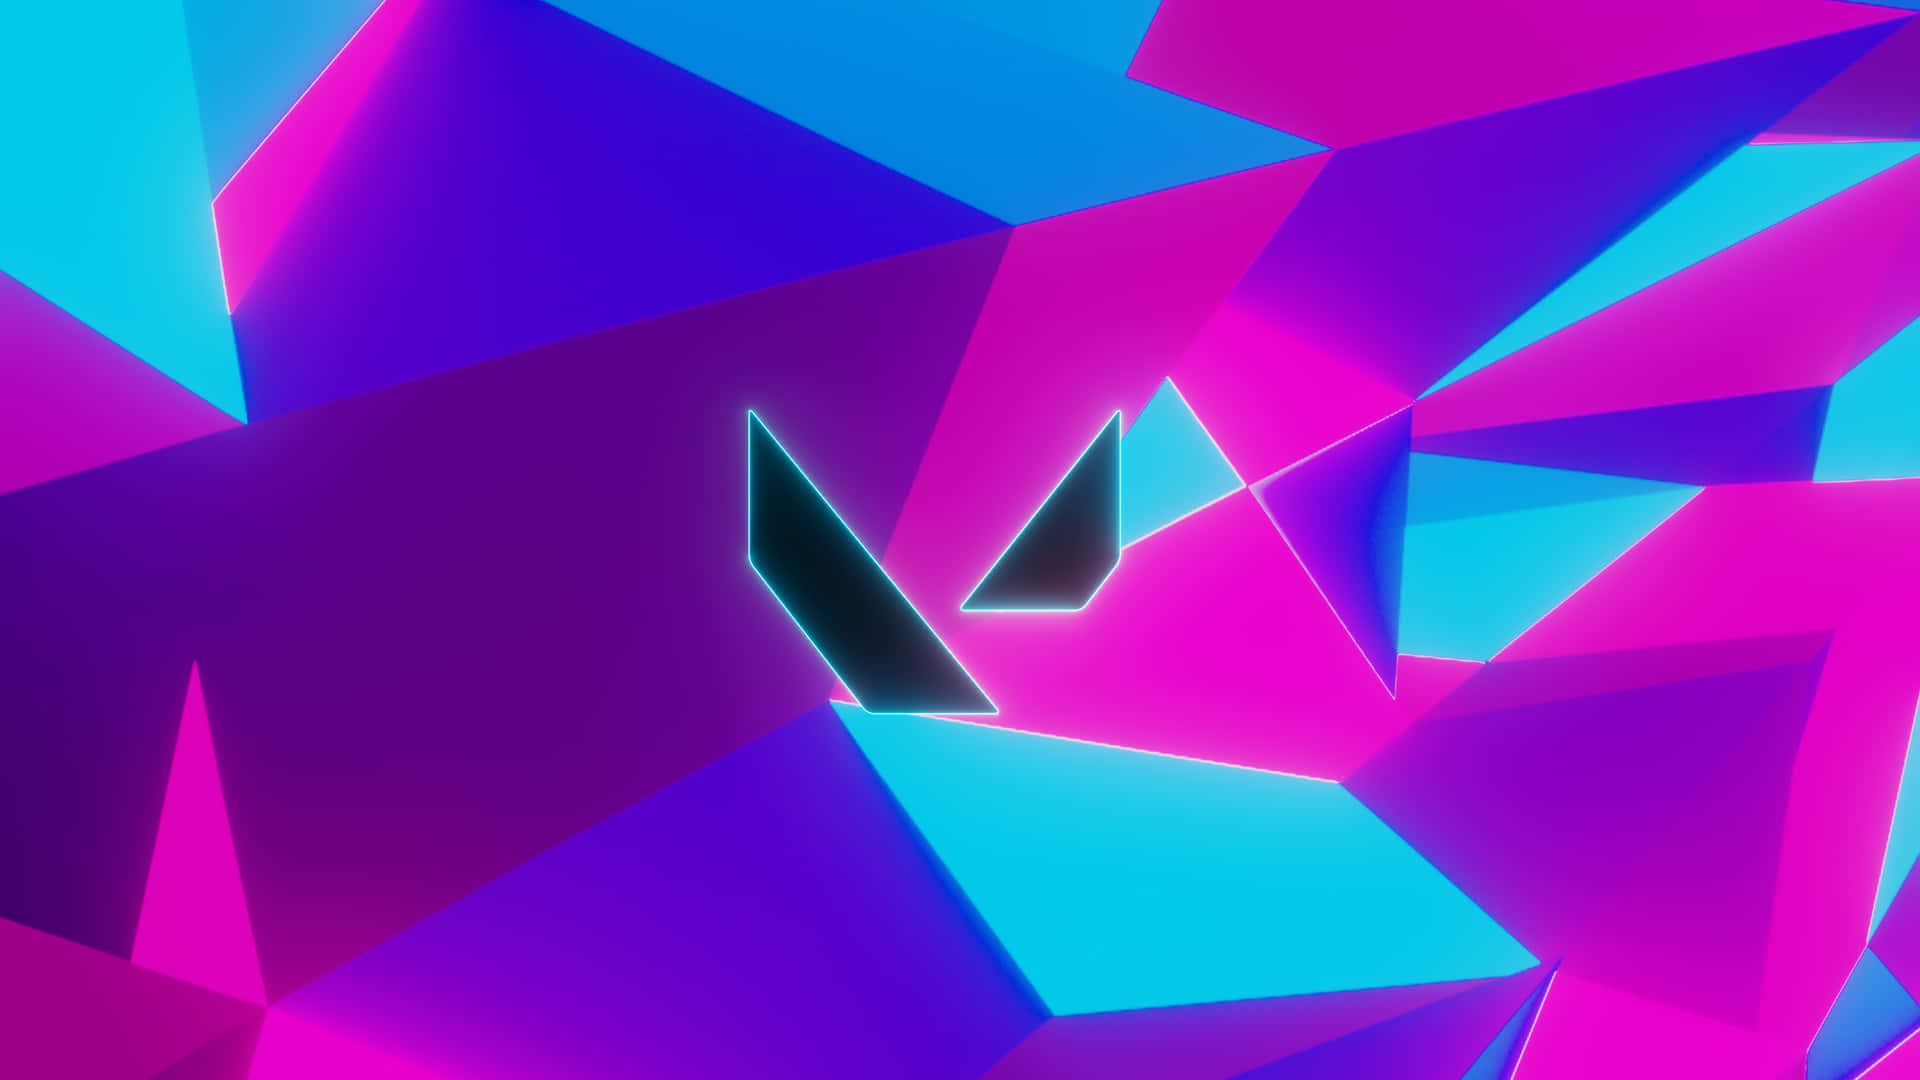 A Colorful Abstract Background With A Blue And Pink Triangle